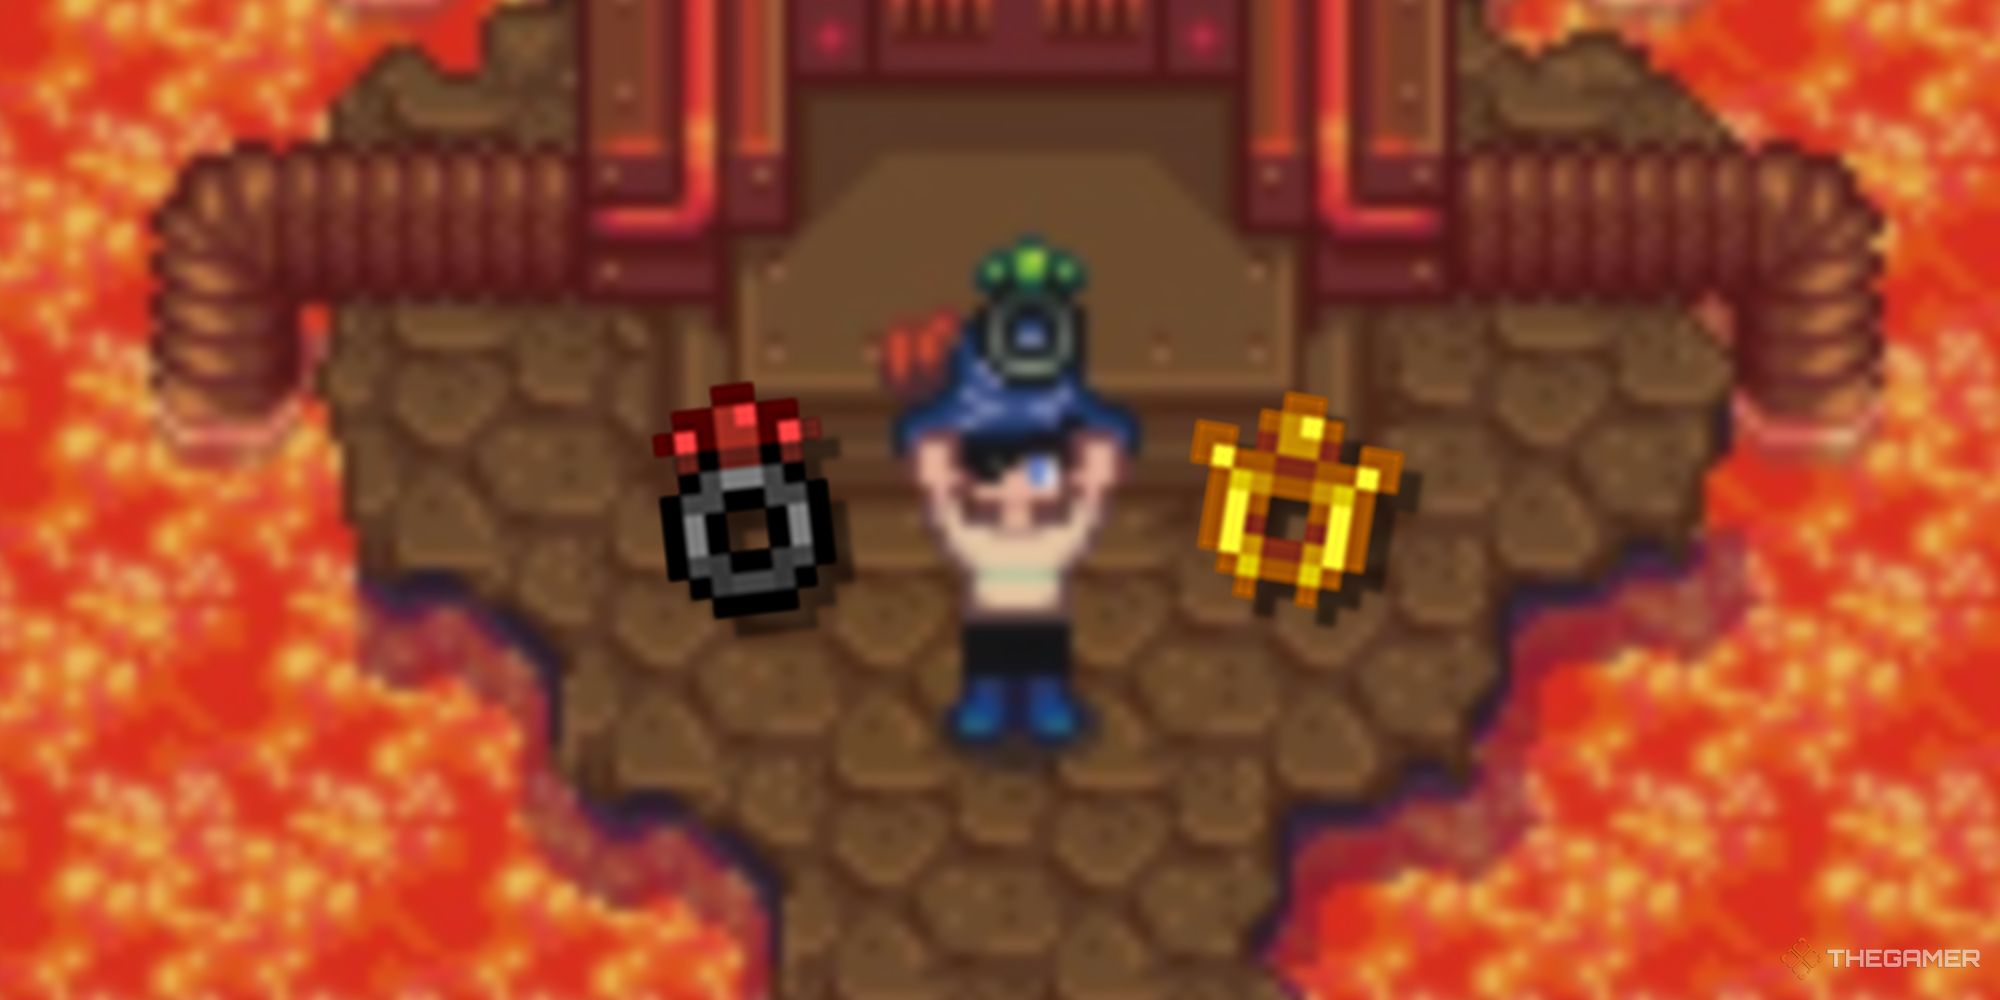 stardew valley player at volcano forge blurry, with 2 pngs of rings over the image